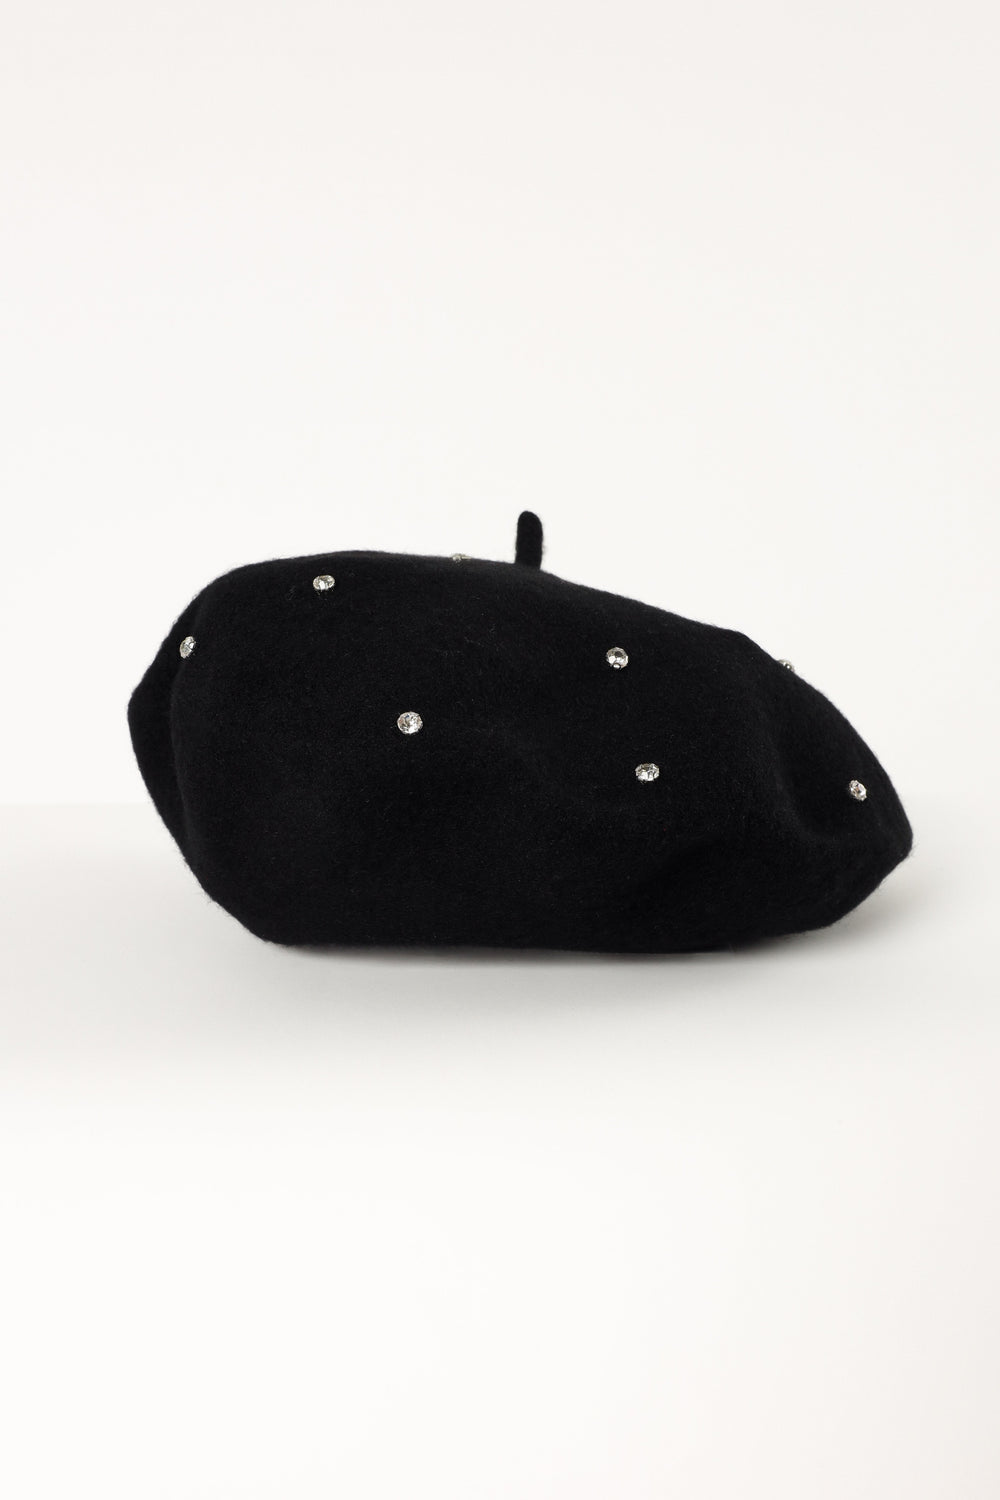 Petal and Pup USA ACCESSORIES Remy Beret - Black One Size